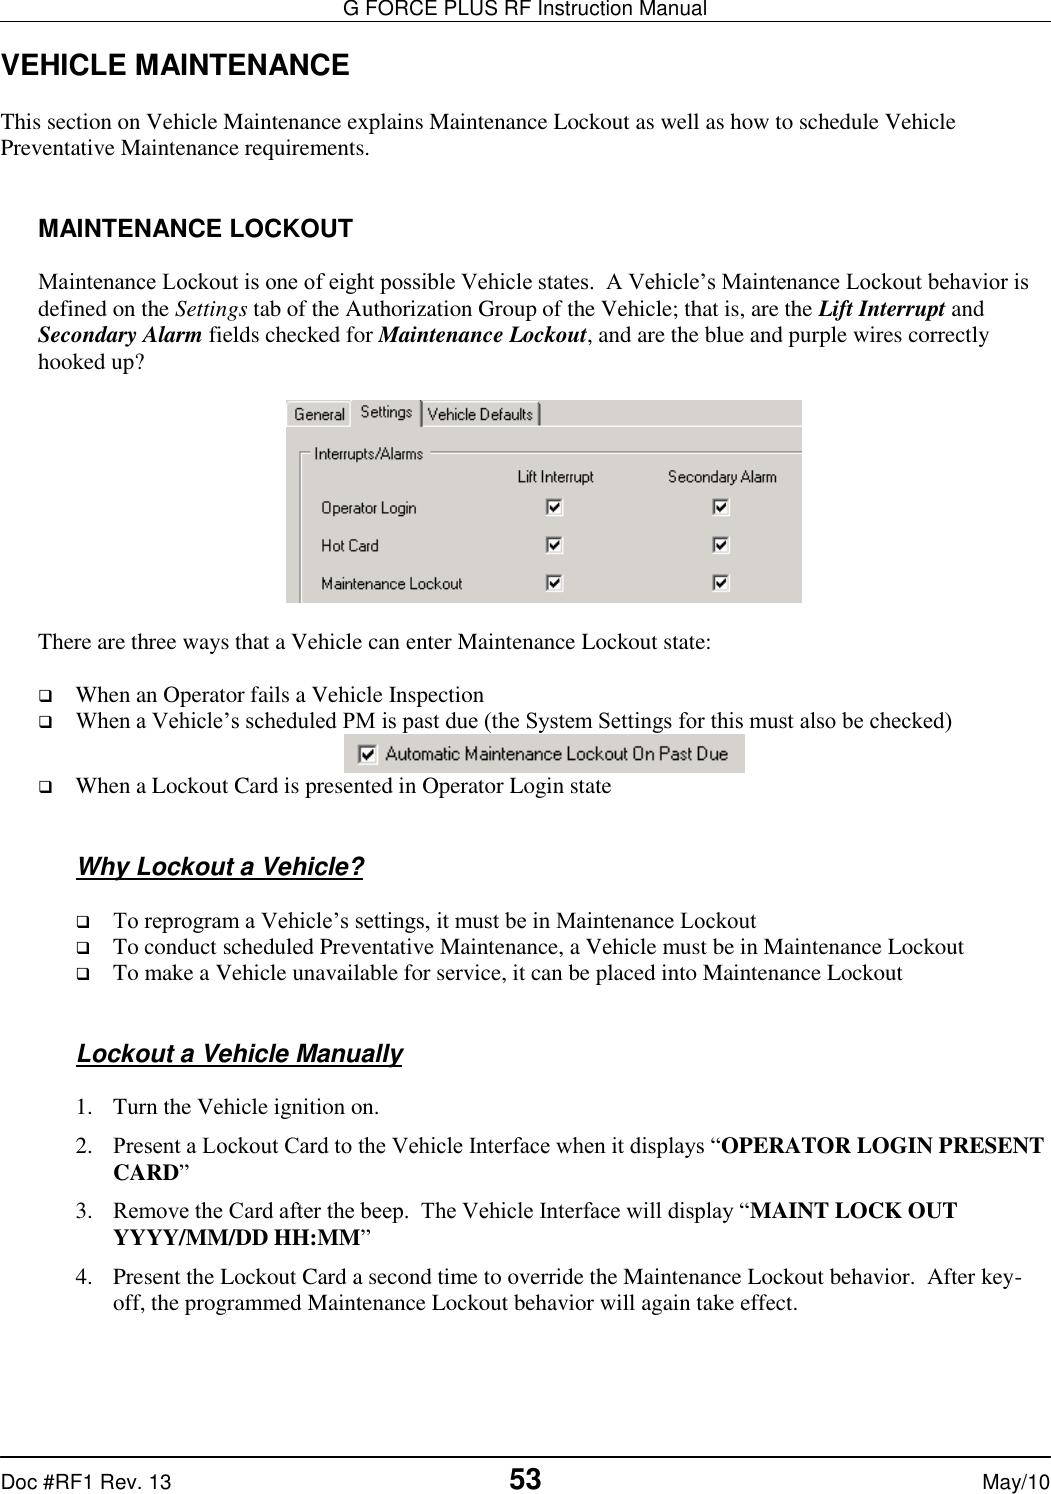 G FORCE PLUS RF Instruction Manual   Doc #RF1 Rev. 13  53 May/10 VEHICLE MAINTENANCE  This section on Vehicle Maintenance explains Maintenance Lockout as well as how to schedule Vehicle Preventative Maintenance requirements.   MAINTENANCE LOCKOUT  Maintenance Lockout is one of eight possible Vehicle states.  A Vehicle’s Maintenance Lockout behavior is defined on the Settings tab of the Authorization Group of the Vehicle; that is, are the Lift Interrupt and Secondary Alarm fields checked for Maintenance Lockout, and are the blue and purple wires correctly hooked up?     There are three ways that a Vehicle can enter Maintenance Lockout state:   When an Operator fails a Vehicle Inspection  When a Vehicle’s scheduled PM is past due (the System Settings for this must also be checked)   When a Lockout Card is presented in Operator Login state   Why Lockout a Vehicle?   To reprogram a Vehicle’s settings, it must be in Maintenance Lockout  To conduct scheduled Preventative Maintenance, a Vehicle must be in Maintenance Lockout  To make a Vehicle unavailable for service, it can be placed into Maintenance Lockout    Lockout a Vehicle Manually  1. Turn the Vehicle ignition on. 2. Present a Lockout Card to the Vehicle Interface when it displays “OPERATOR LOGIN PRESENT CARD” 3. Remove the Card after the beep.  The Vehicle Interface will display “MAINT LOCK OUT YYYY/MM/DD HH:MM” 4. Present the Lockout Card a second time to override the Maintenance Lockout behavior.  After key-off, the programmed Maintenance Lockout behavior will again take effect.  